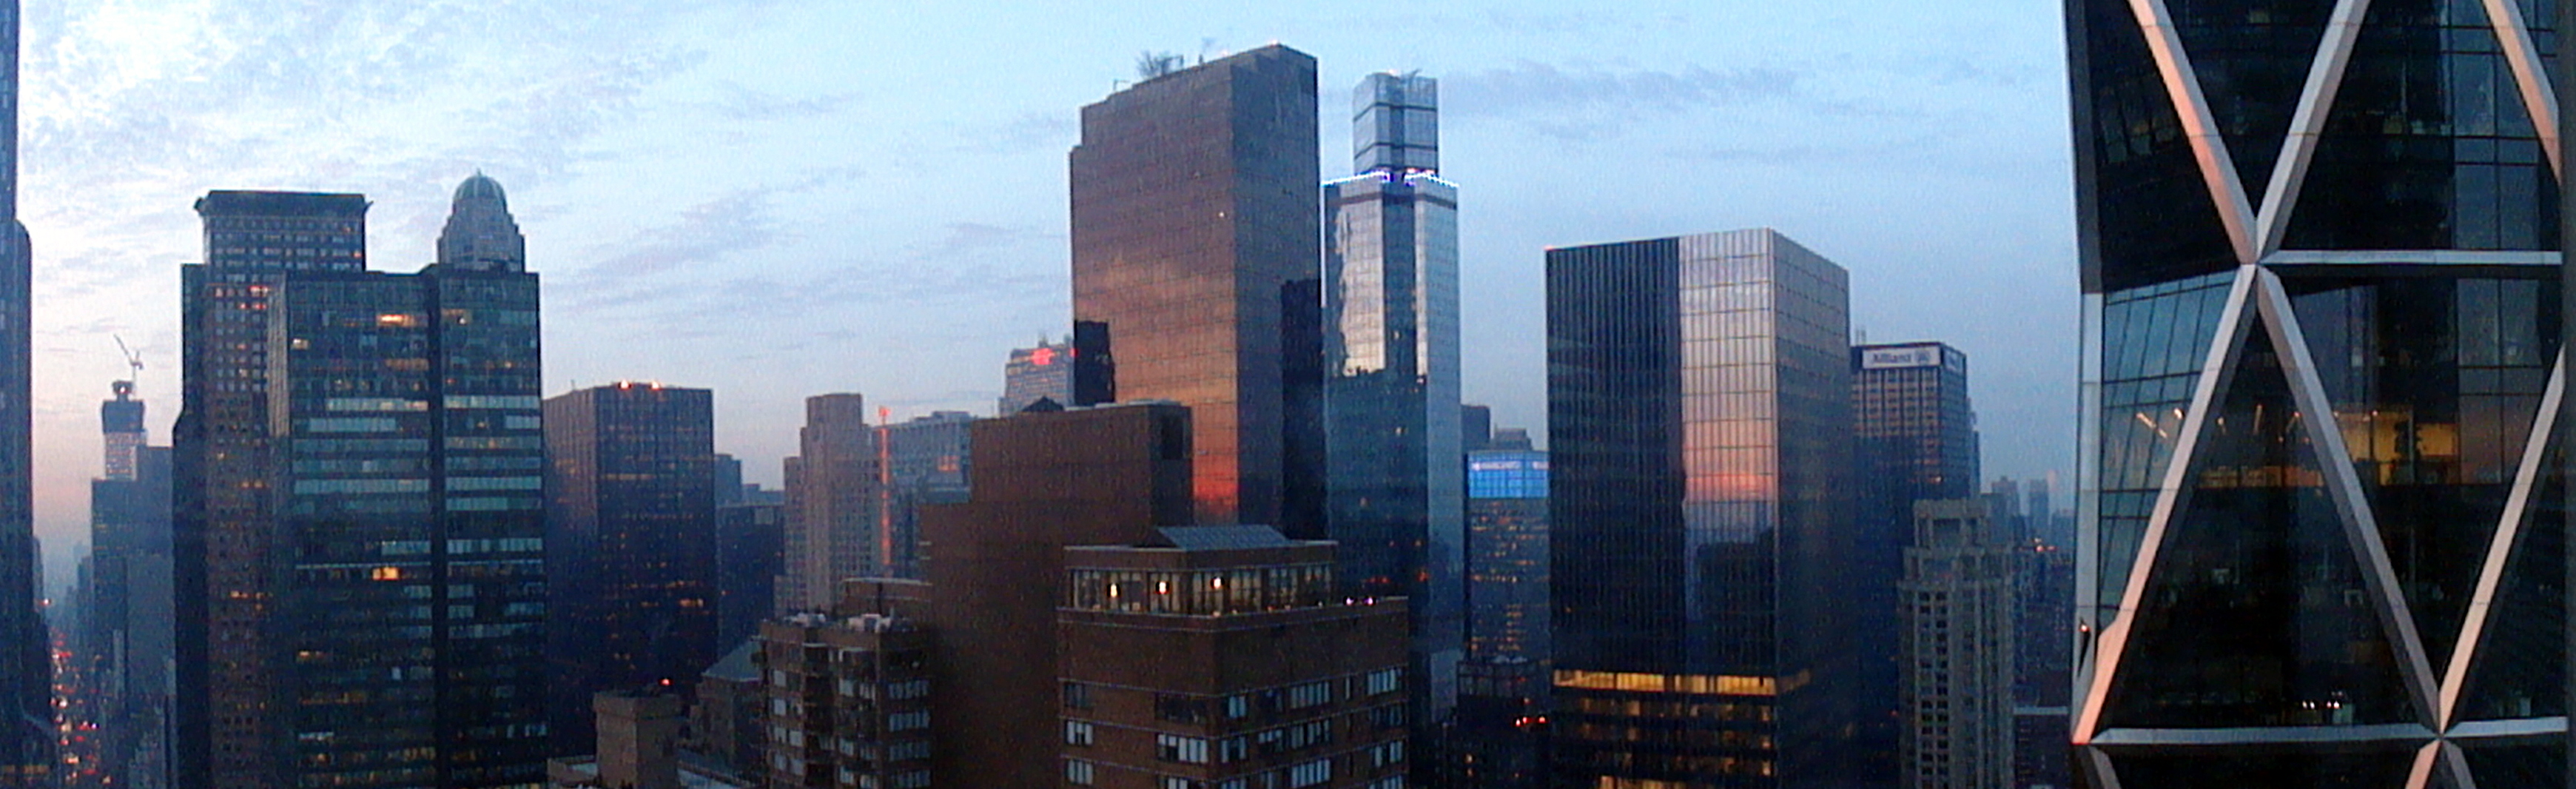 South-looking skyline at Sunrise